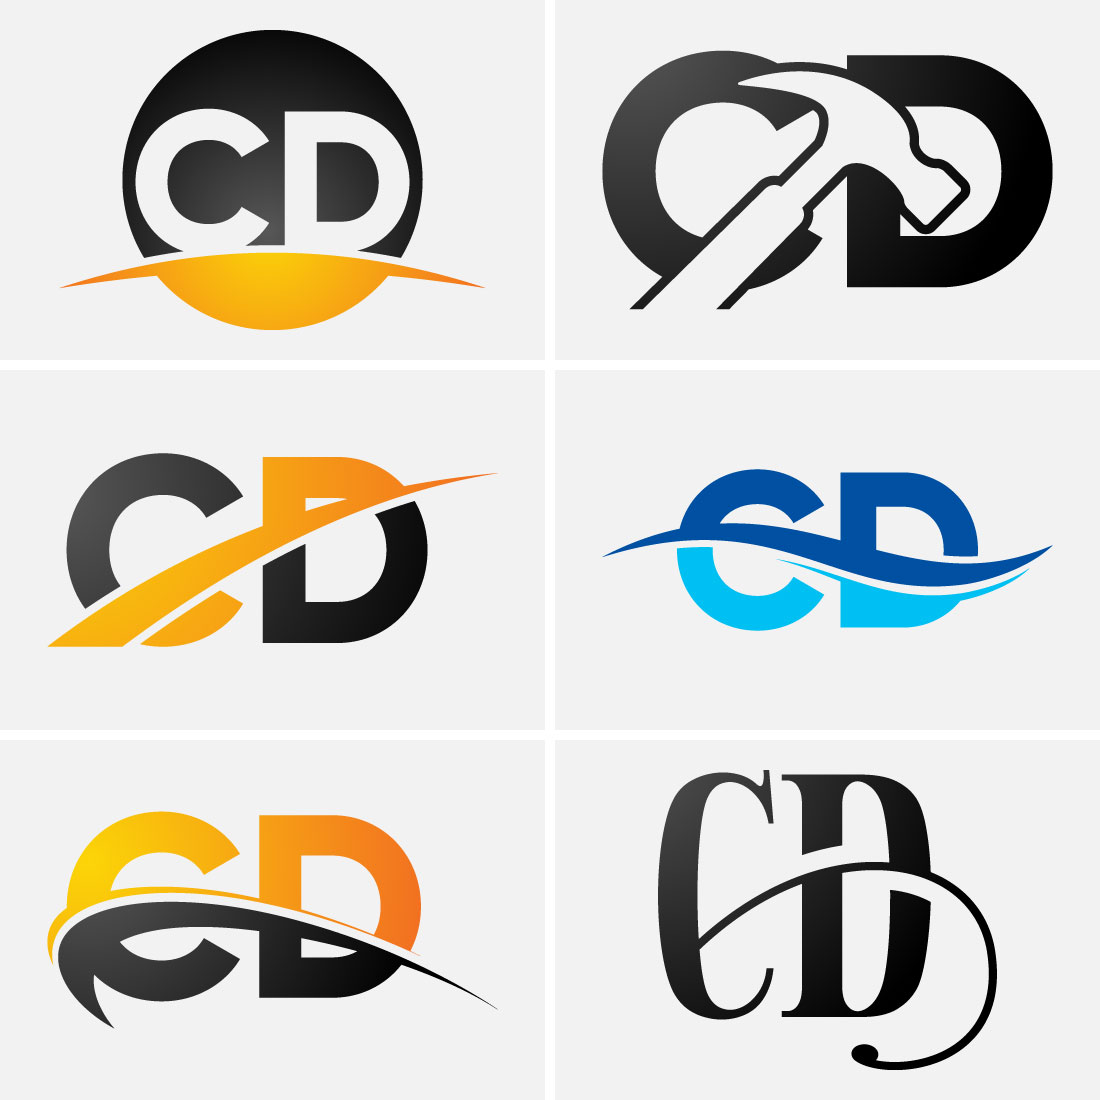 C D Initial Letter Logo Design, Graphic Alphabet Symbol for Corporate Business Identity cover image.